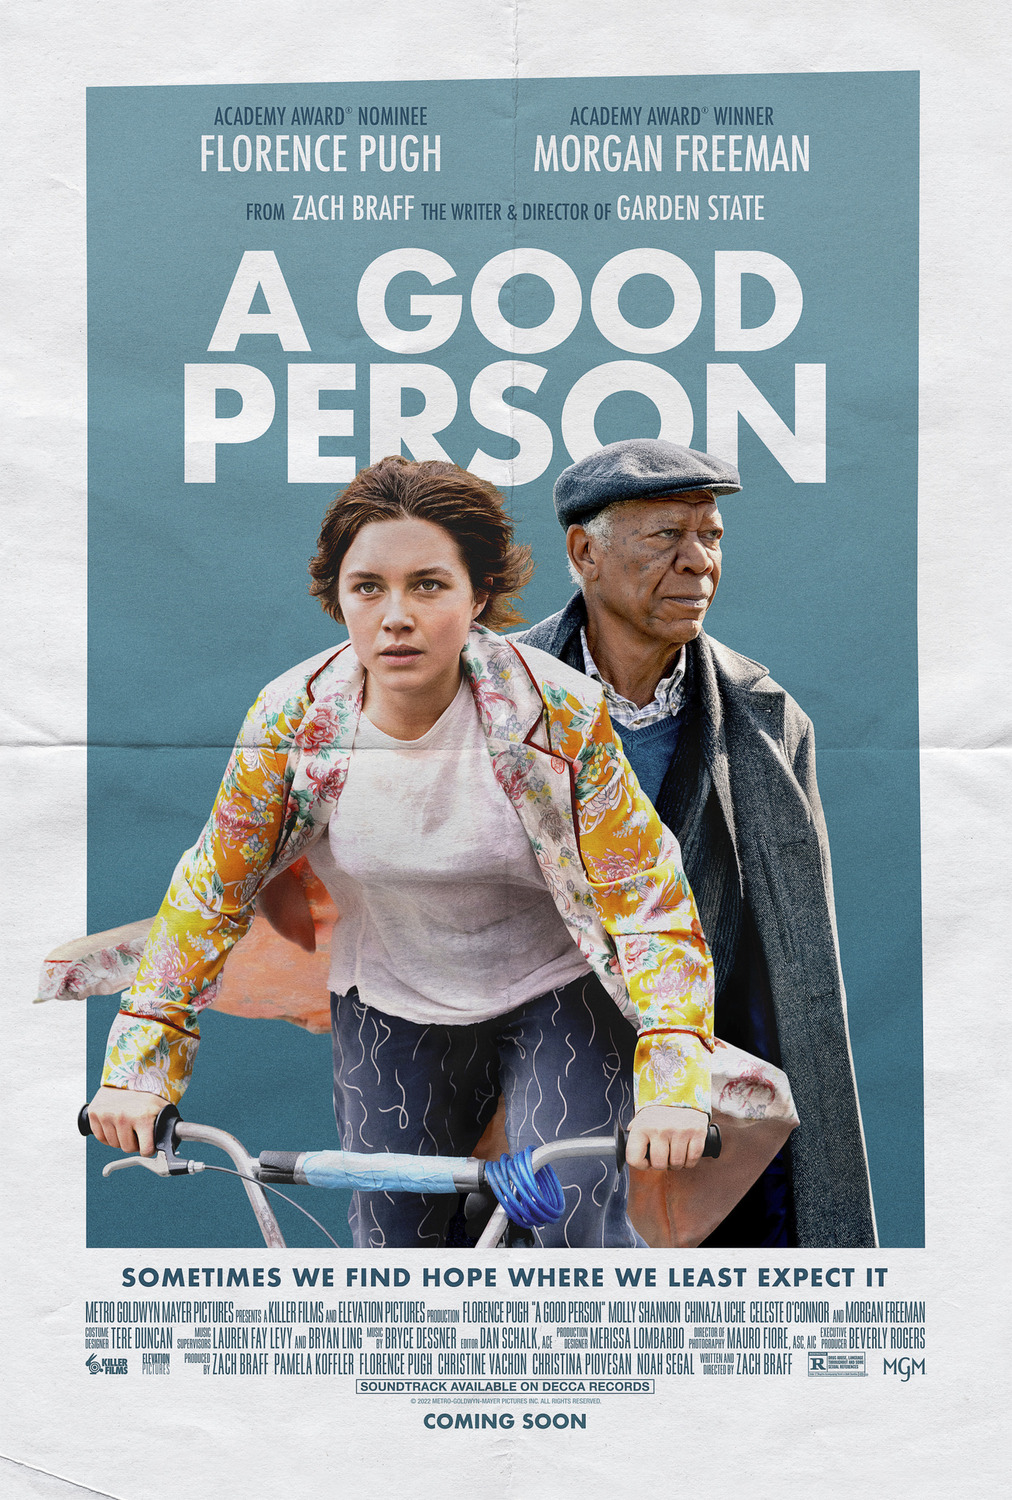 A Good Person Florence Pugh Poster